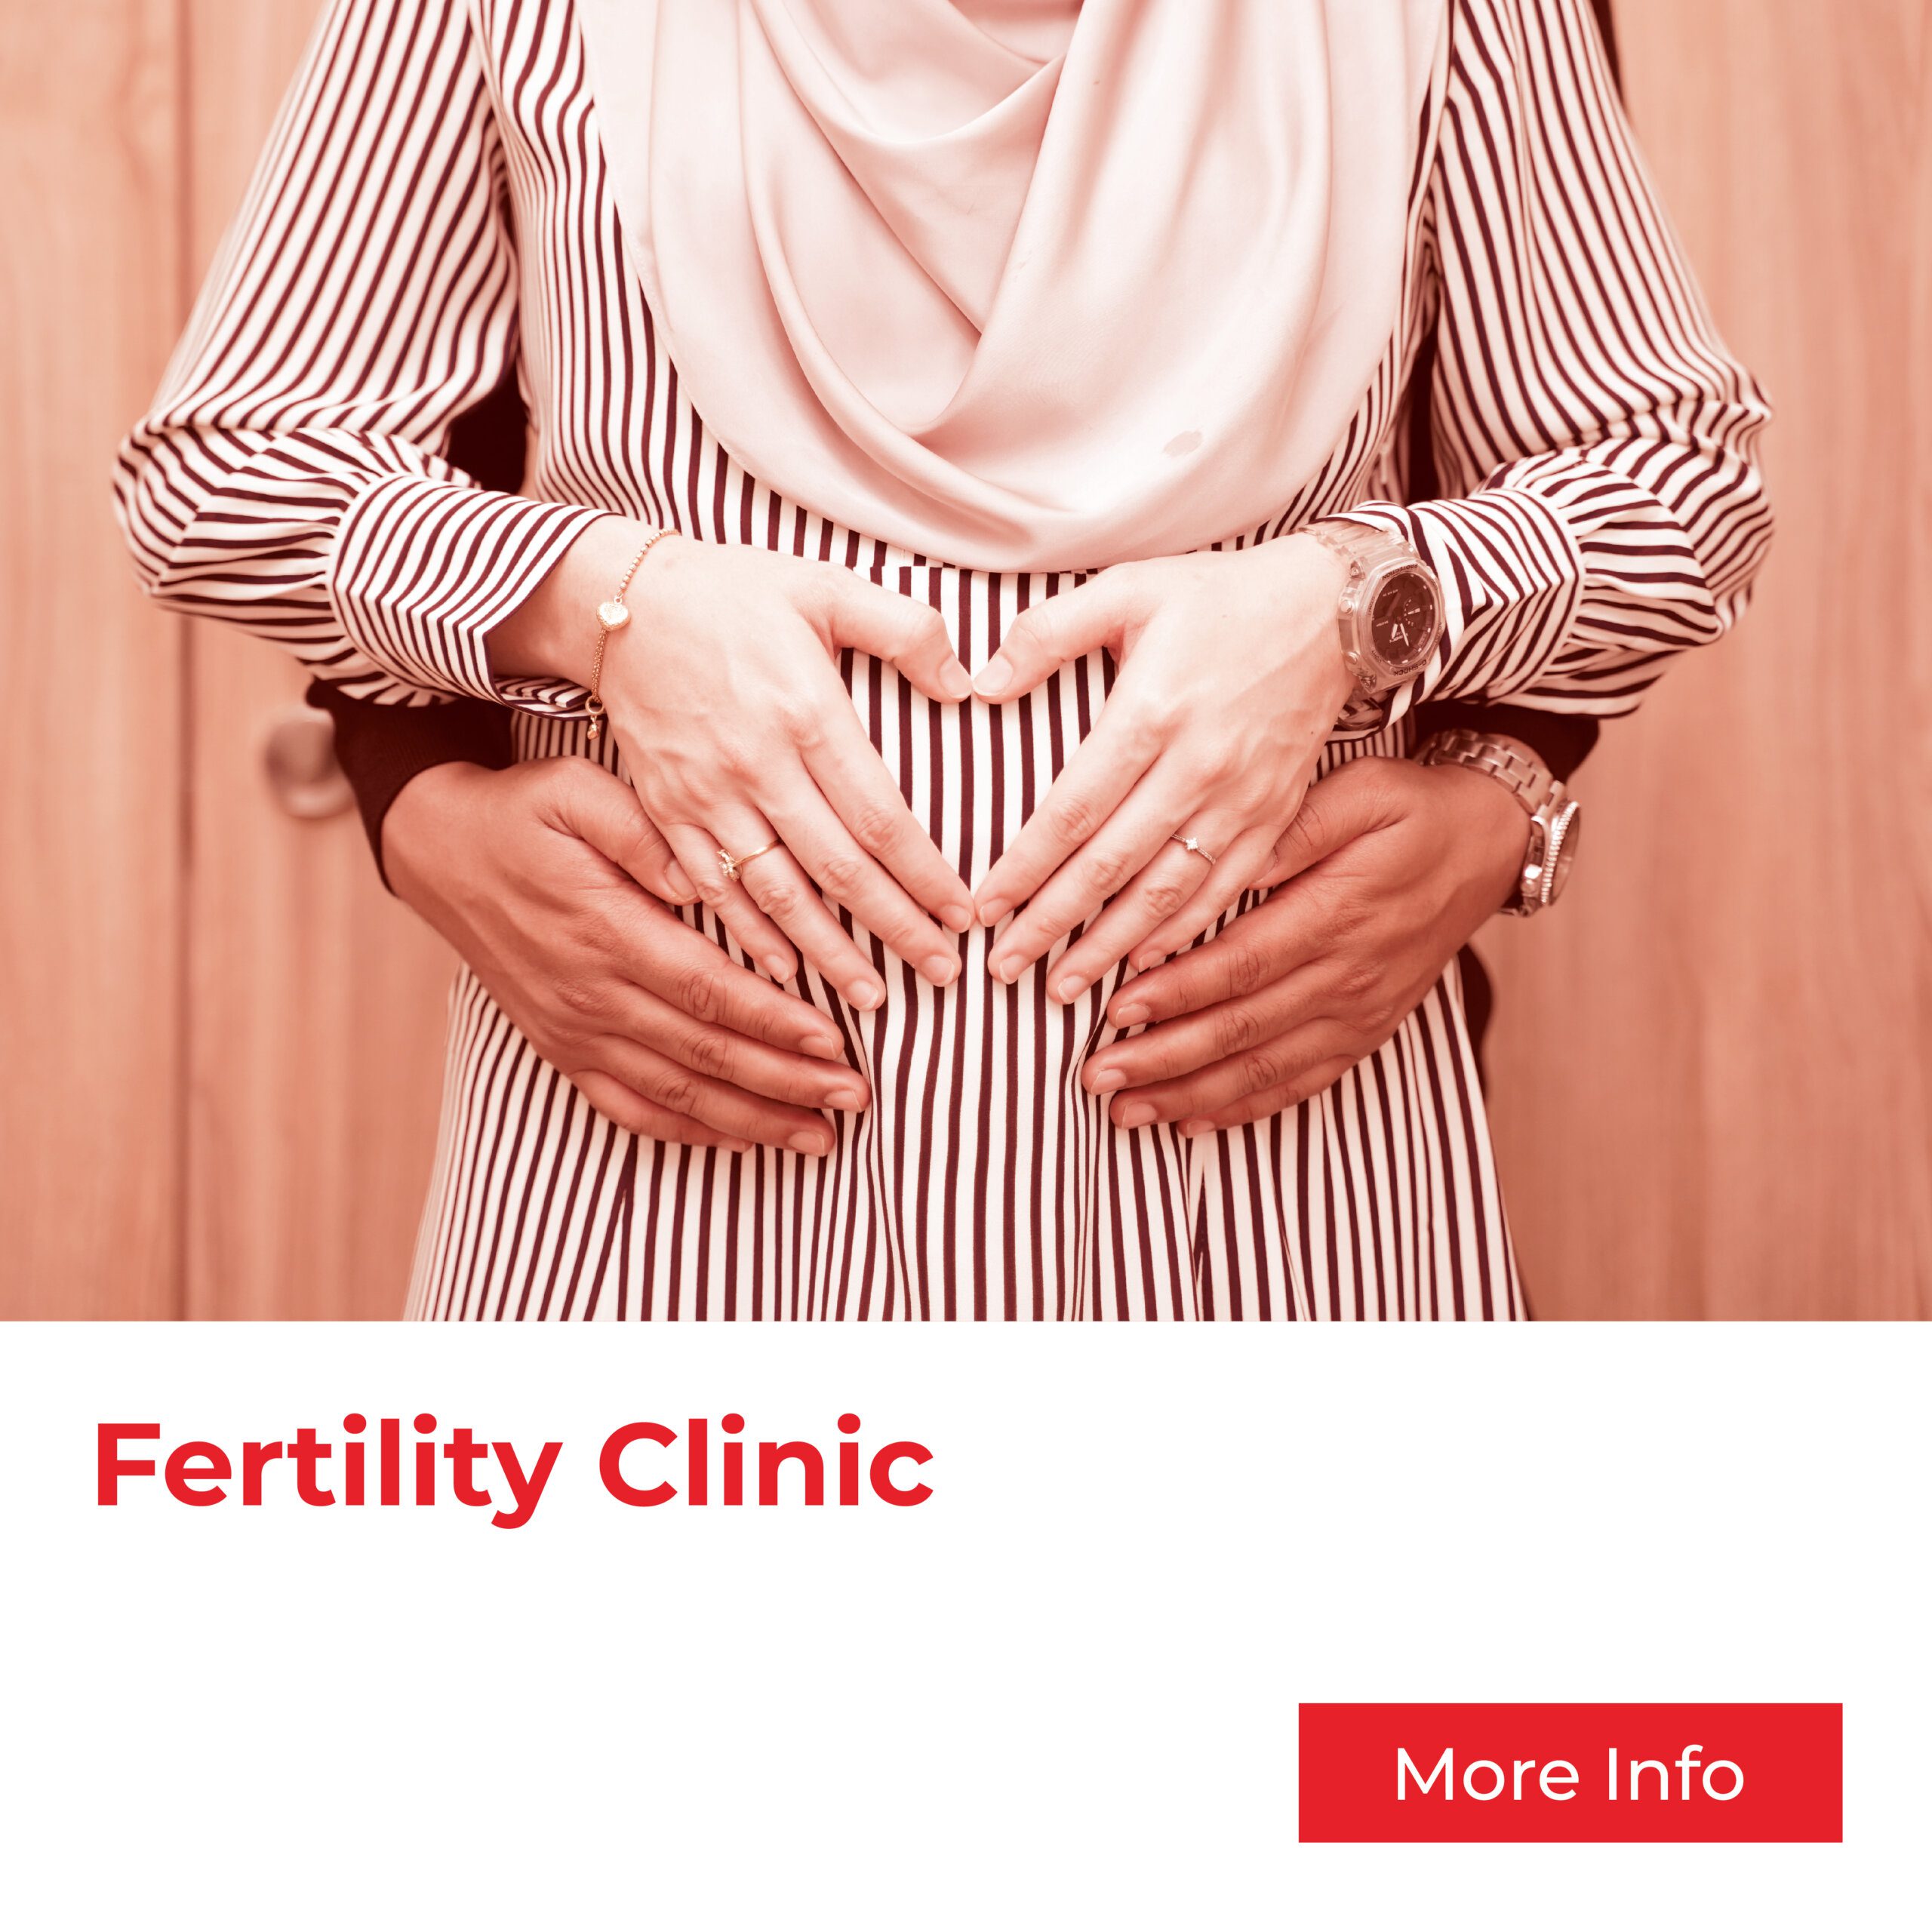 Fertility Centre by Klinik As Salam - One of the Best Fertility Clinic in Malaysia